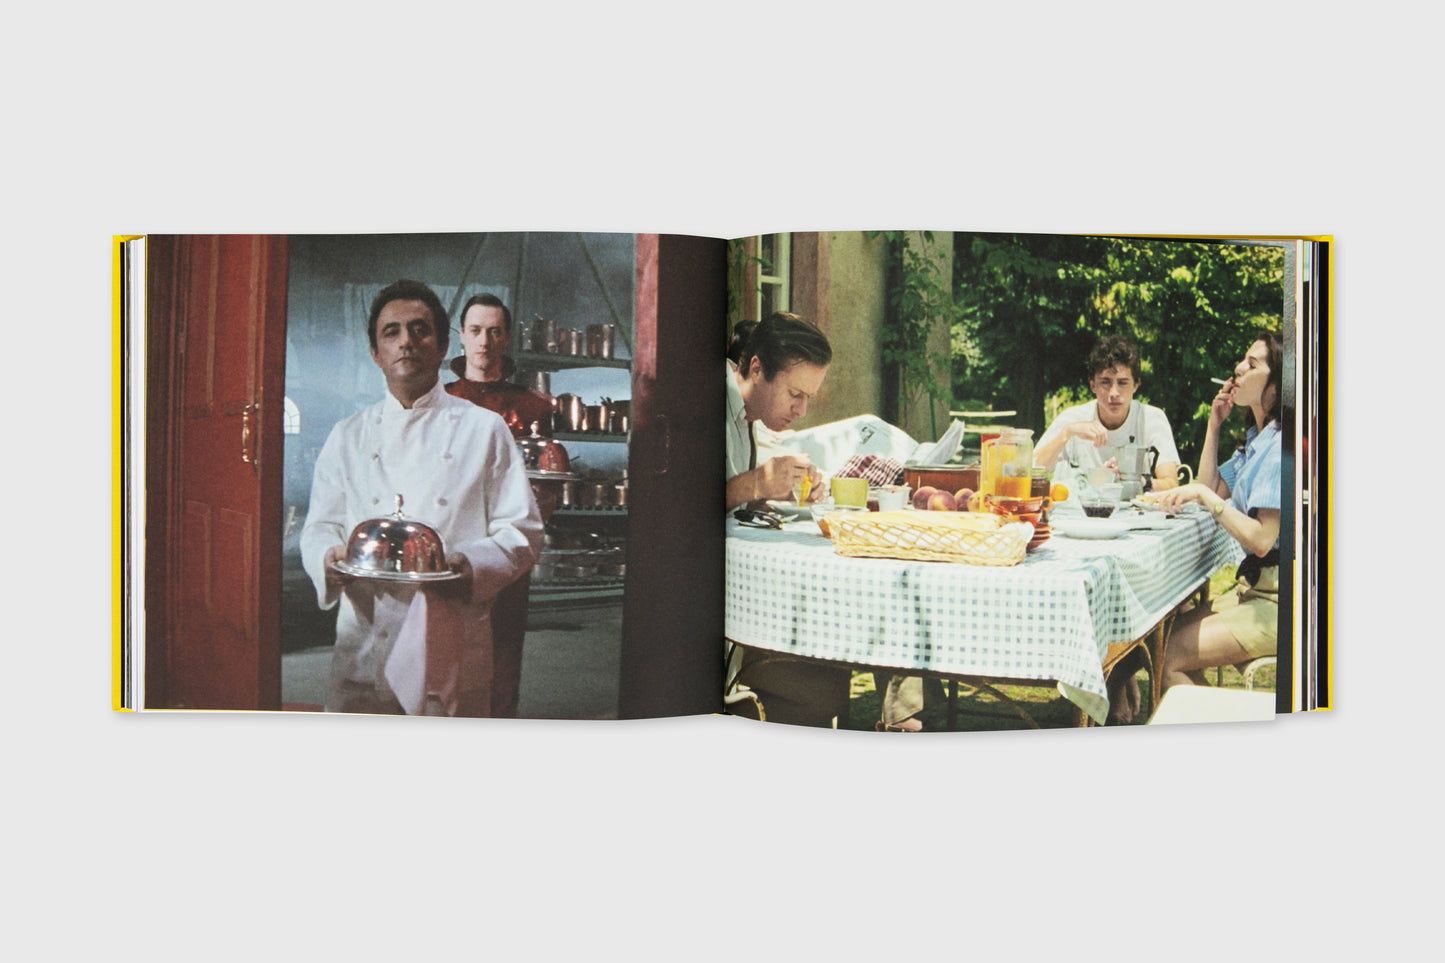 Cooking With Scorsese: The Cookbook